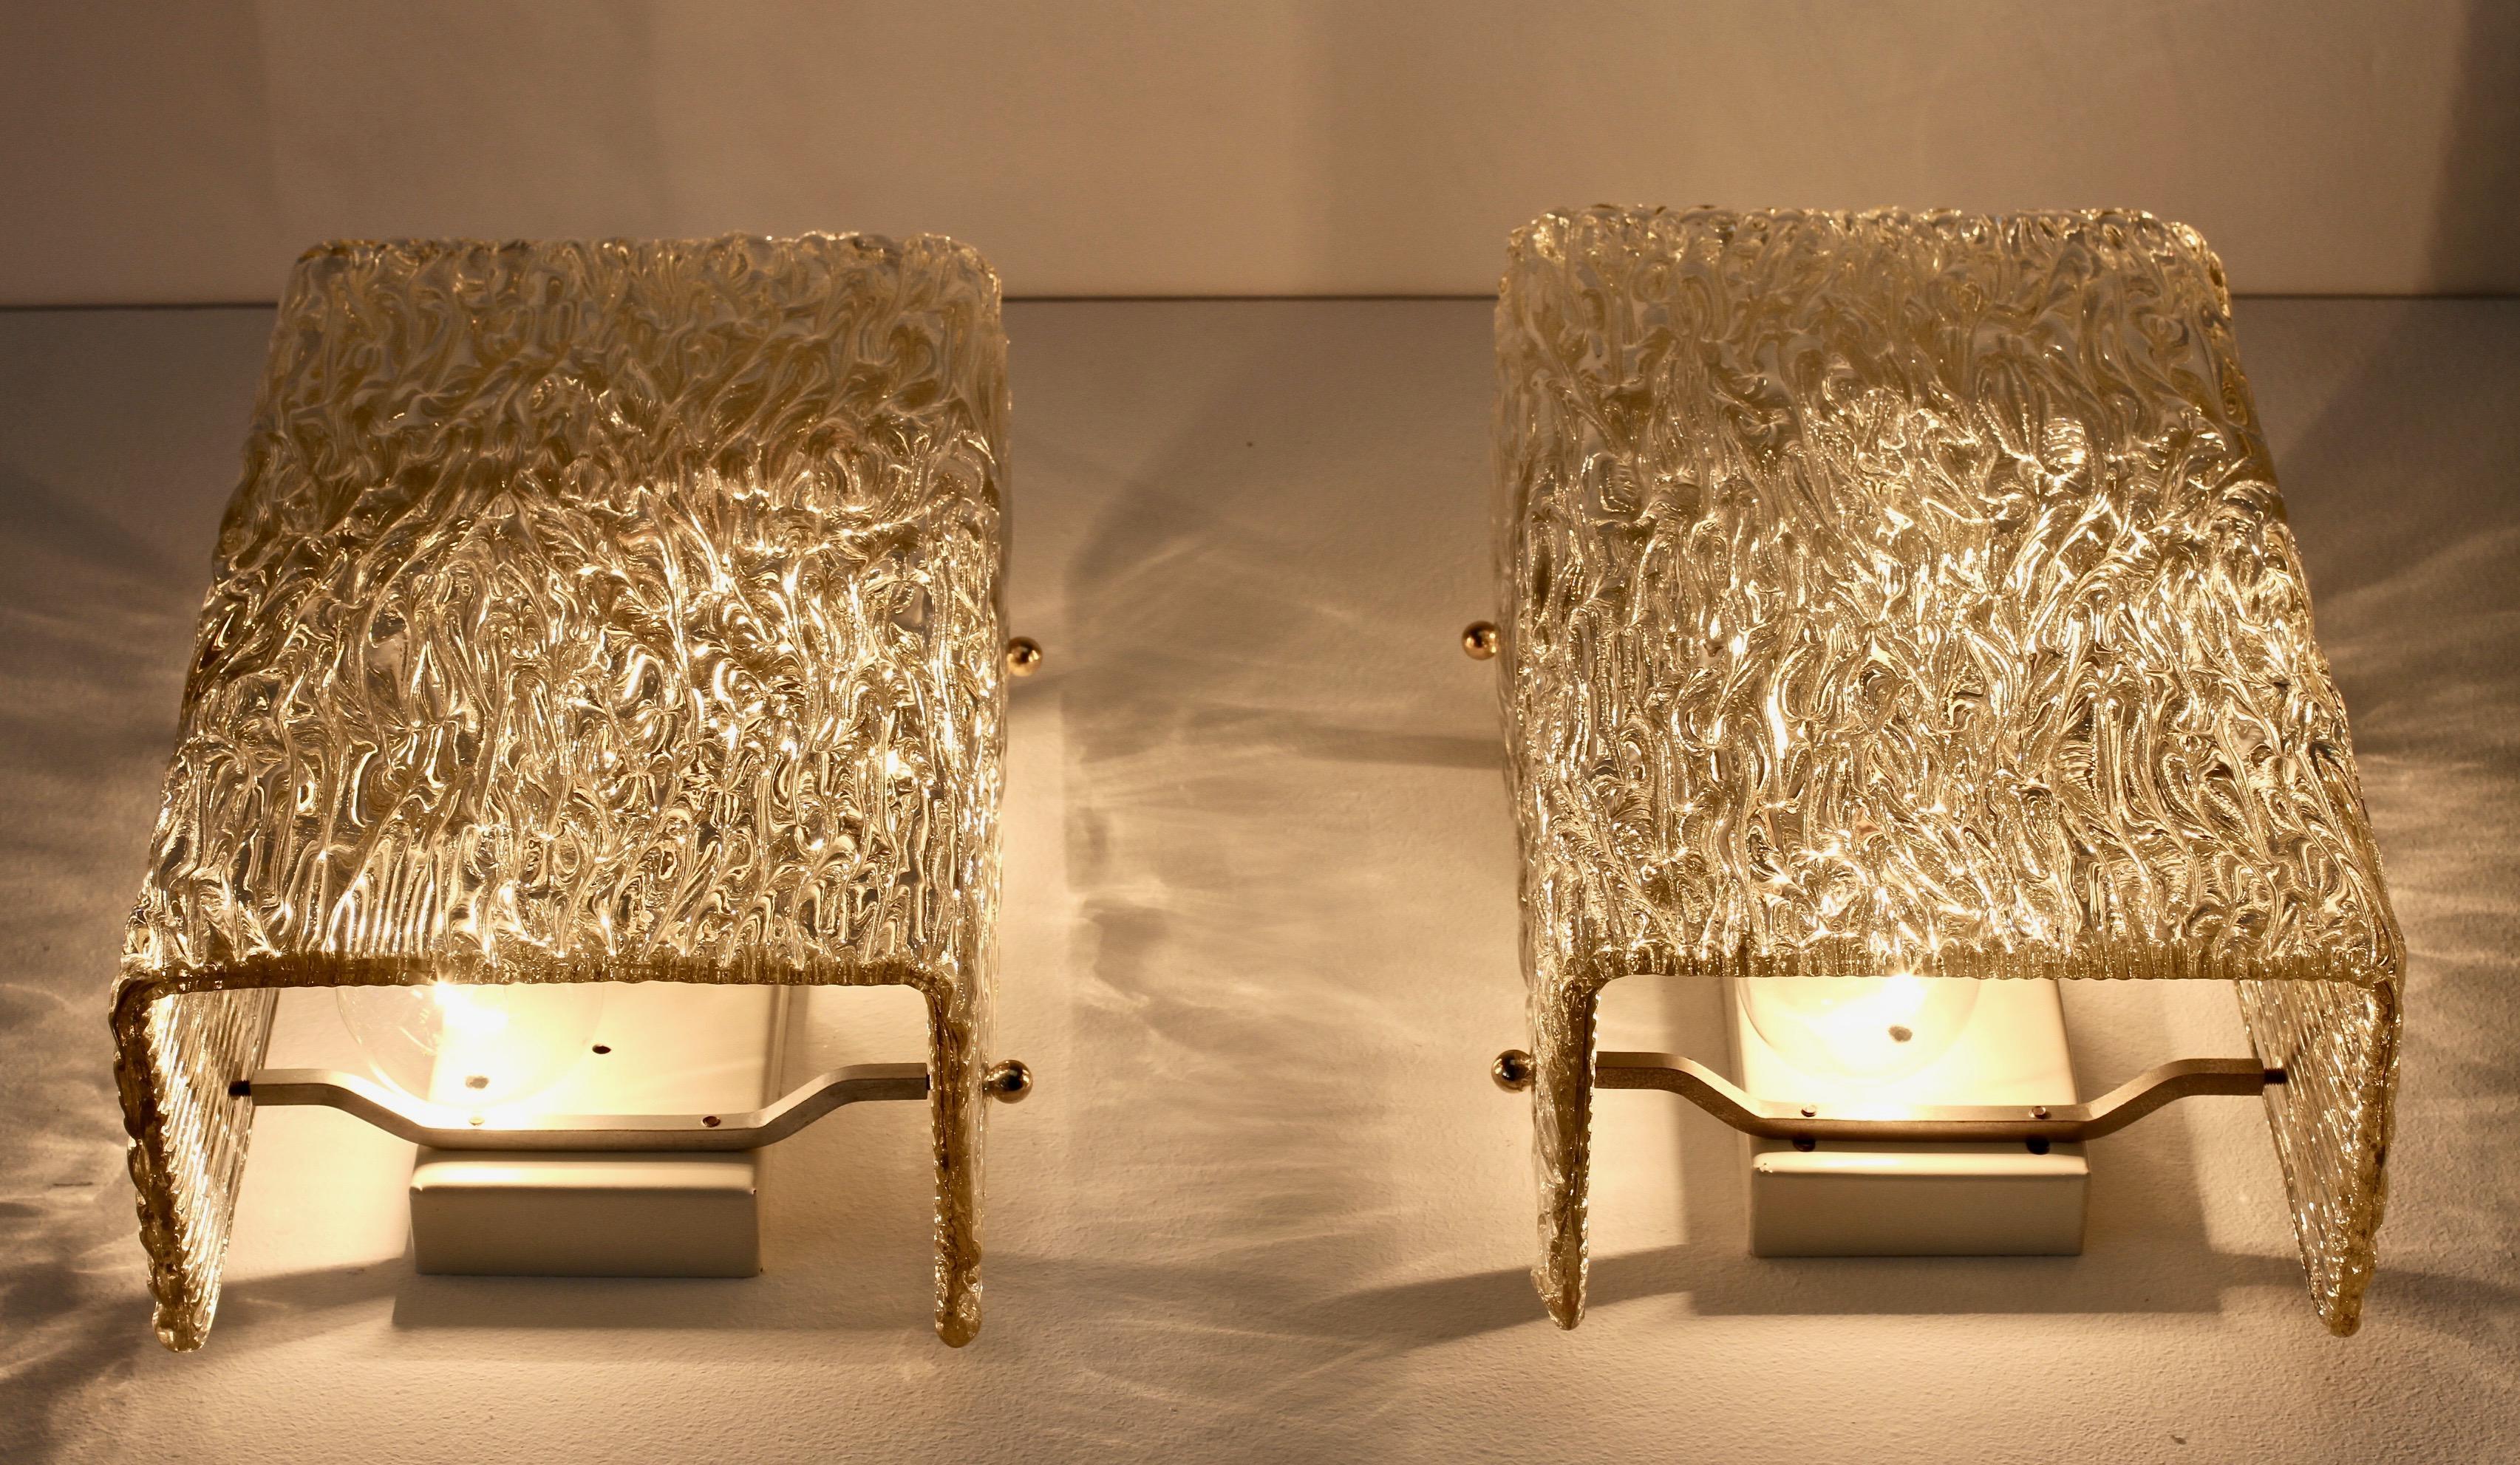 1 of 4 Large Austrian Textured Glass Wall Lights or Sconces by JT Kalmar c. 1955 For Sale 9